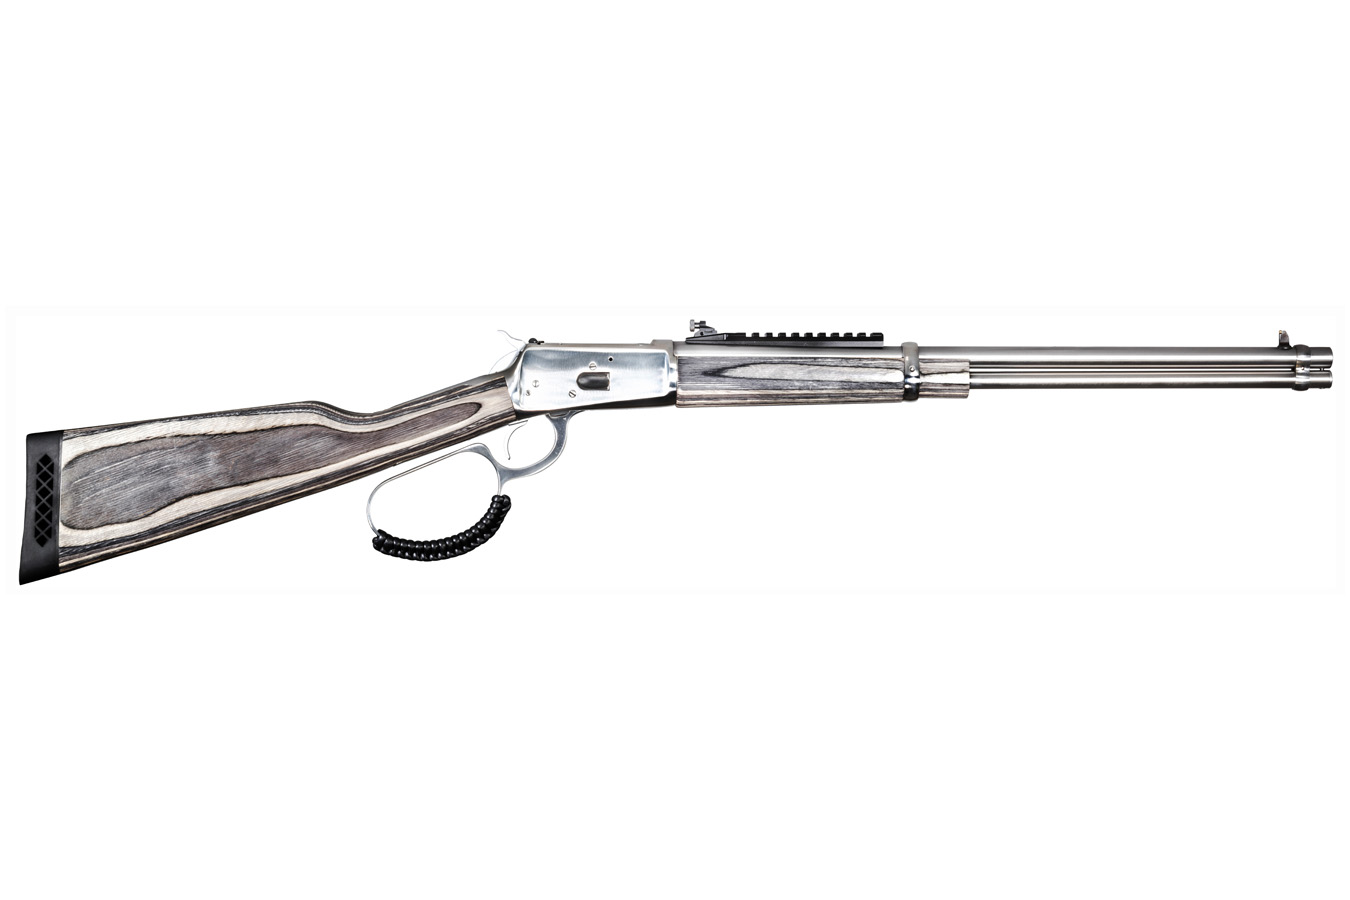 Rossi R95 Lever-Action Rifle